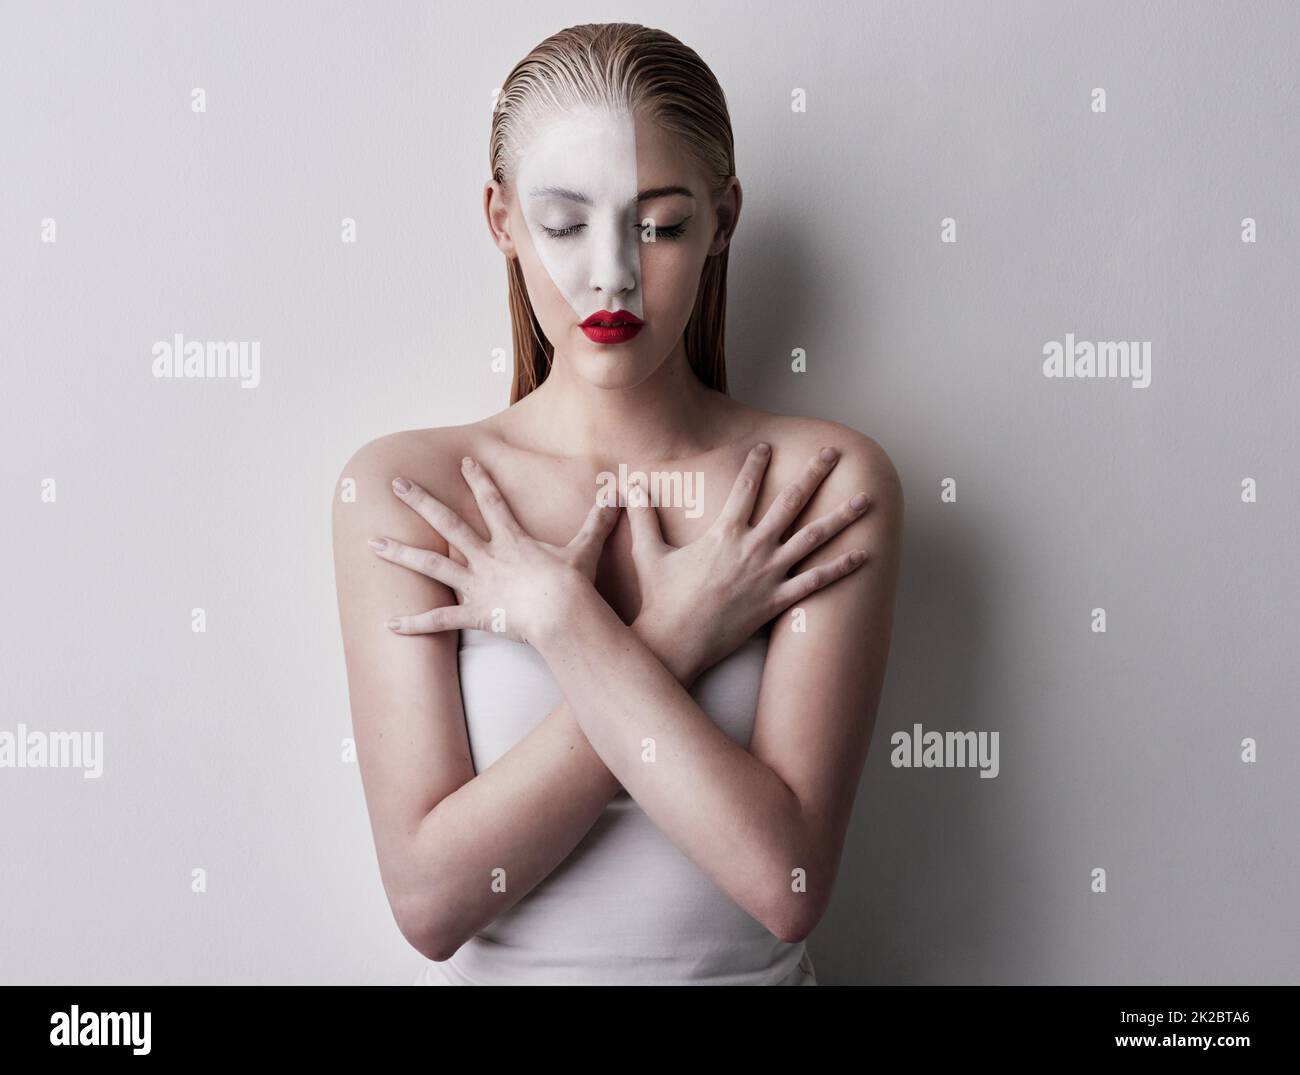 Highlight what you want to highlight. Shot of a beautiful woman wearing face paint and red lipstick against a plain background. Stock Photo